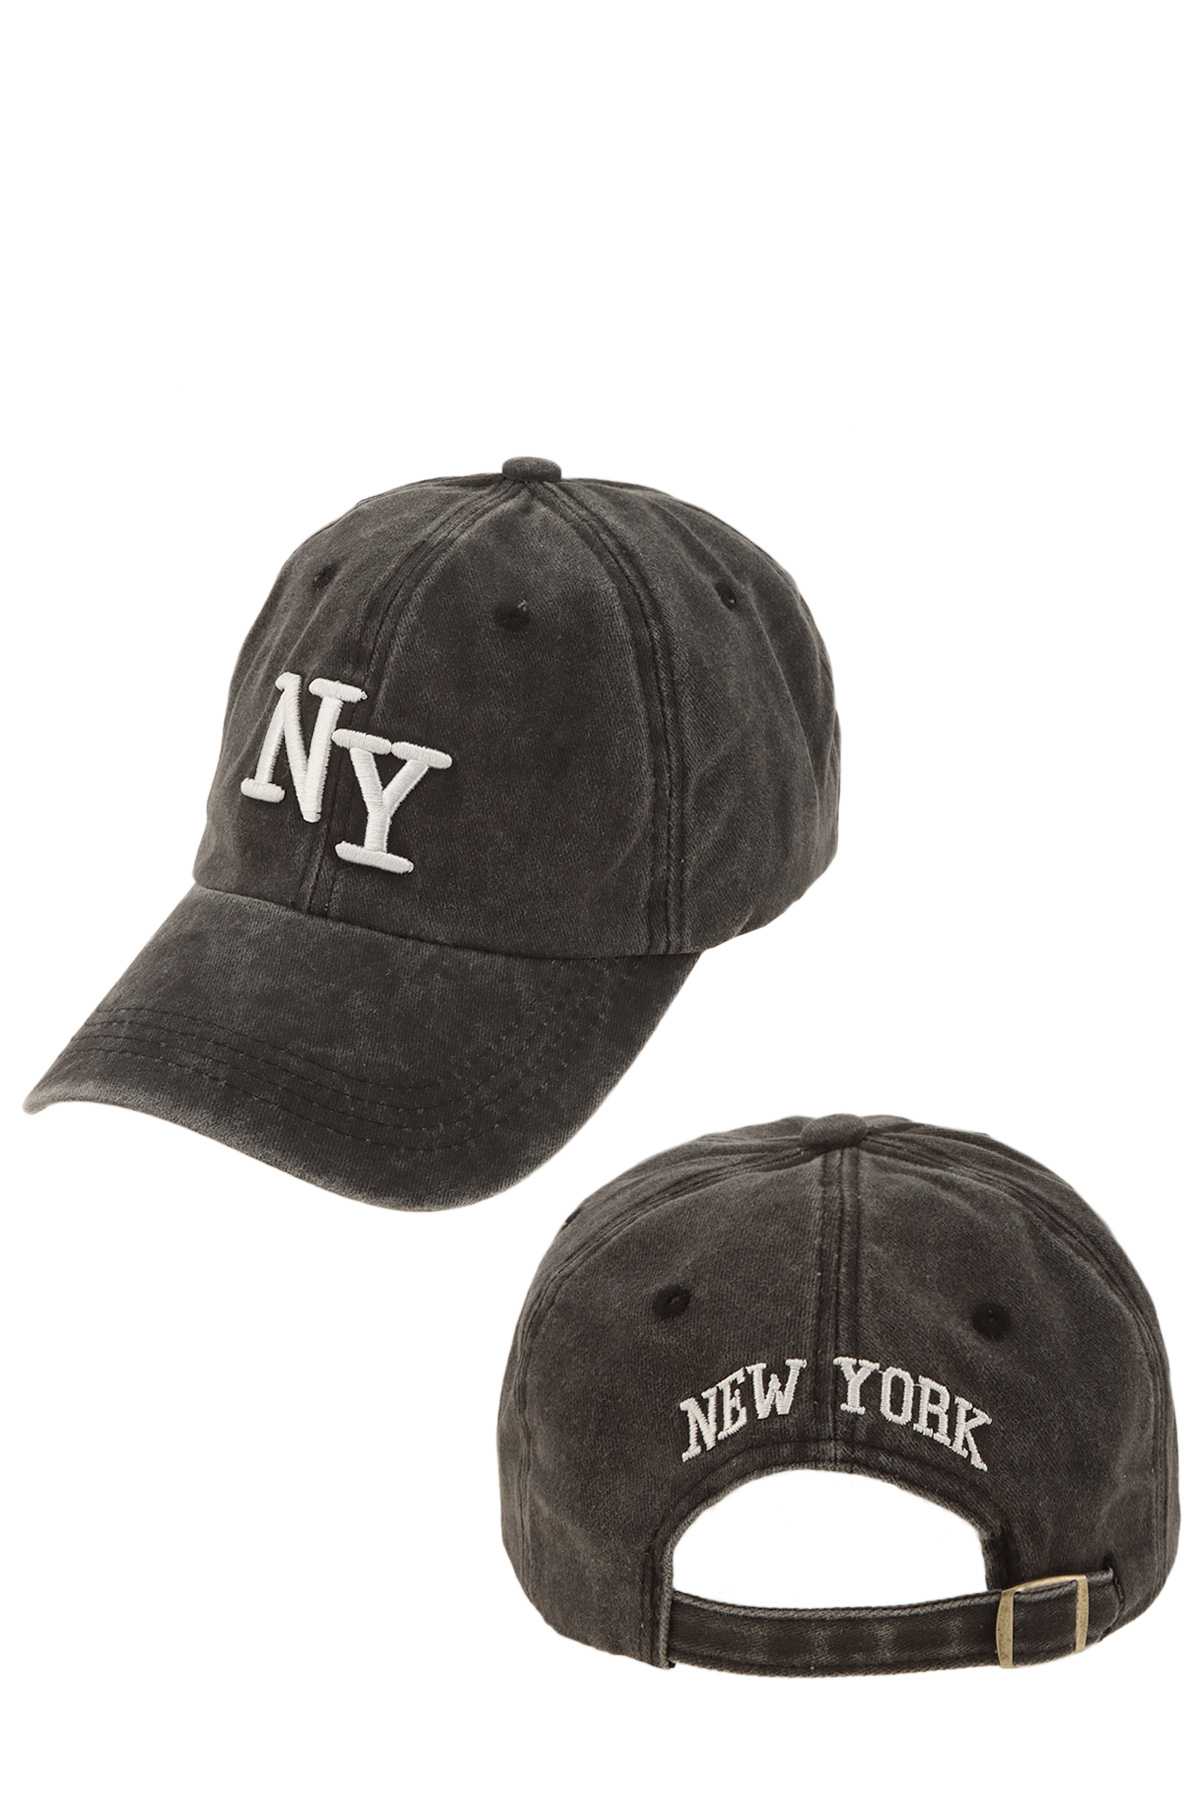 NY Embroidery Pigment Cap